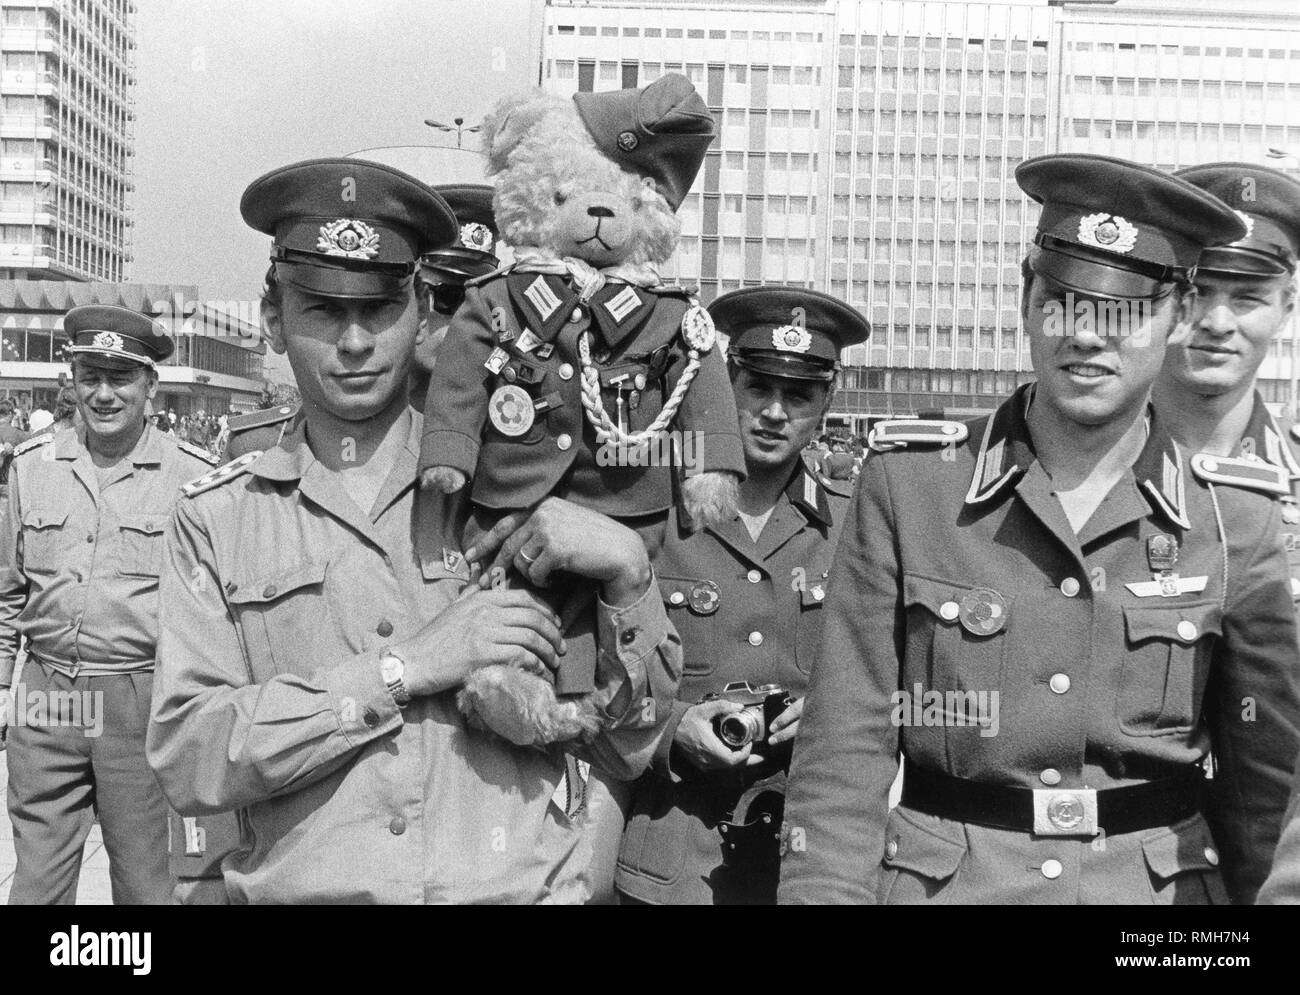 Soldiers of the GDR People's Army with a teddy bear as a mascot in army uniform during the World Festival from 28 July to 5 August 1973 on the Alexanderplatz in Berlin Stock Photo